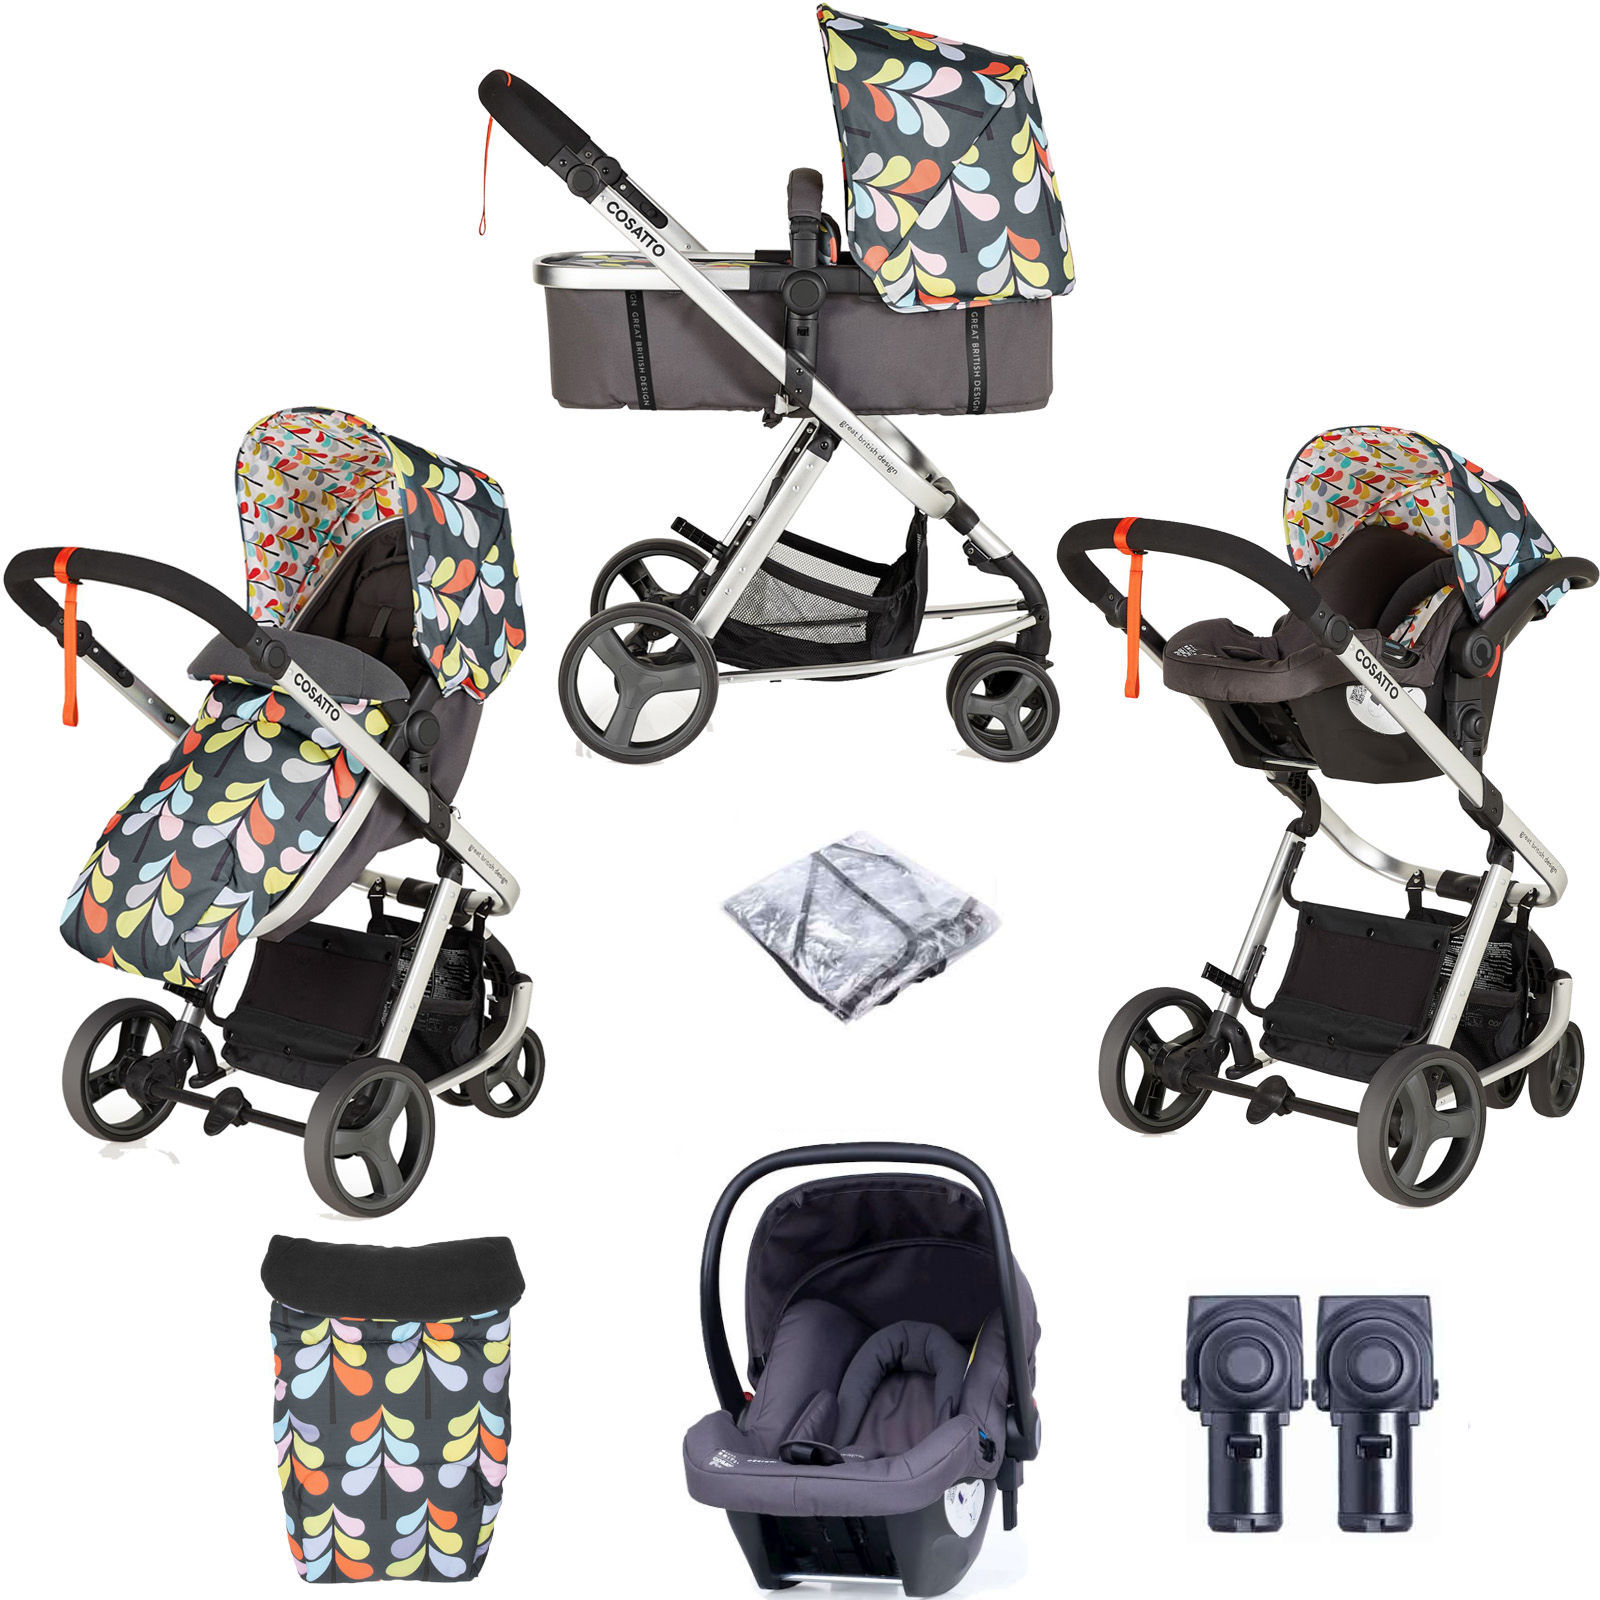 Cosatto Giggle Mix (Hold) Pramette Travel System - Nordik...